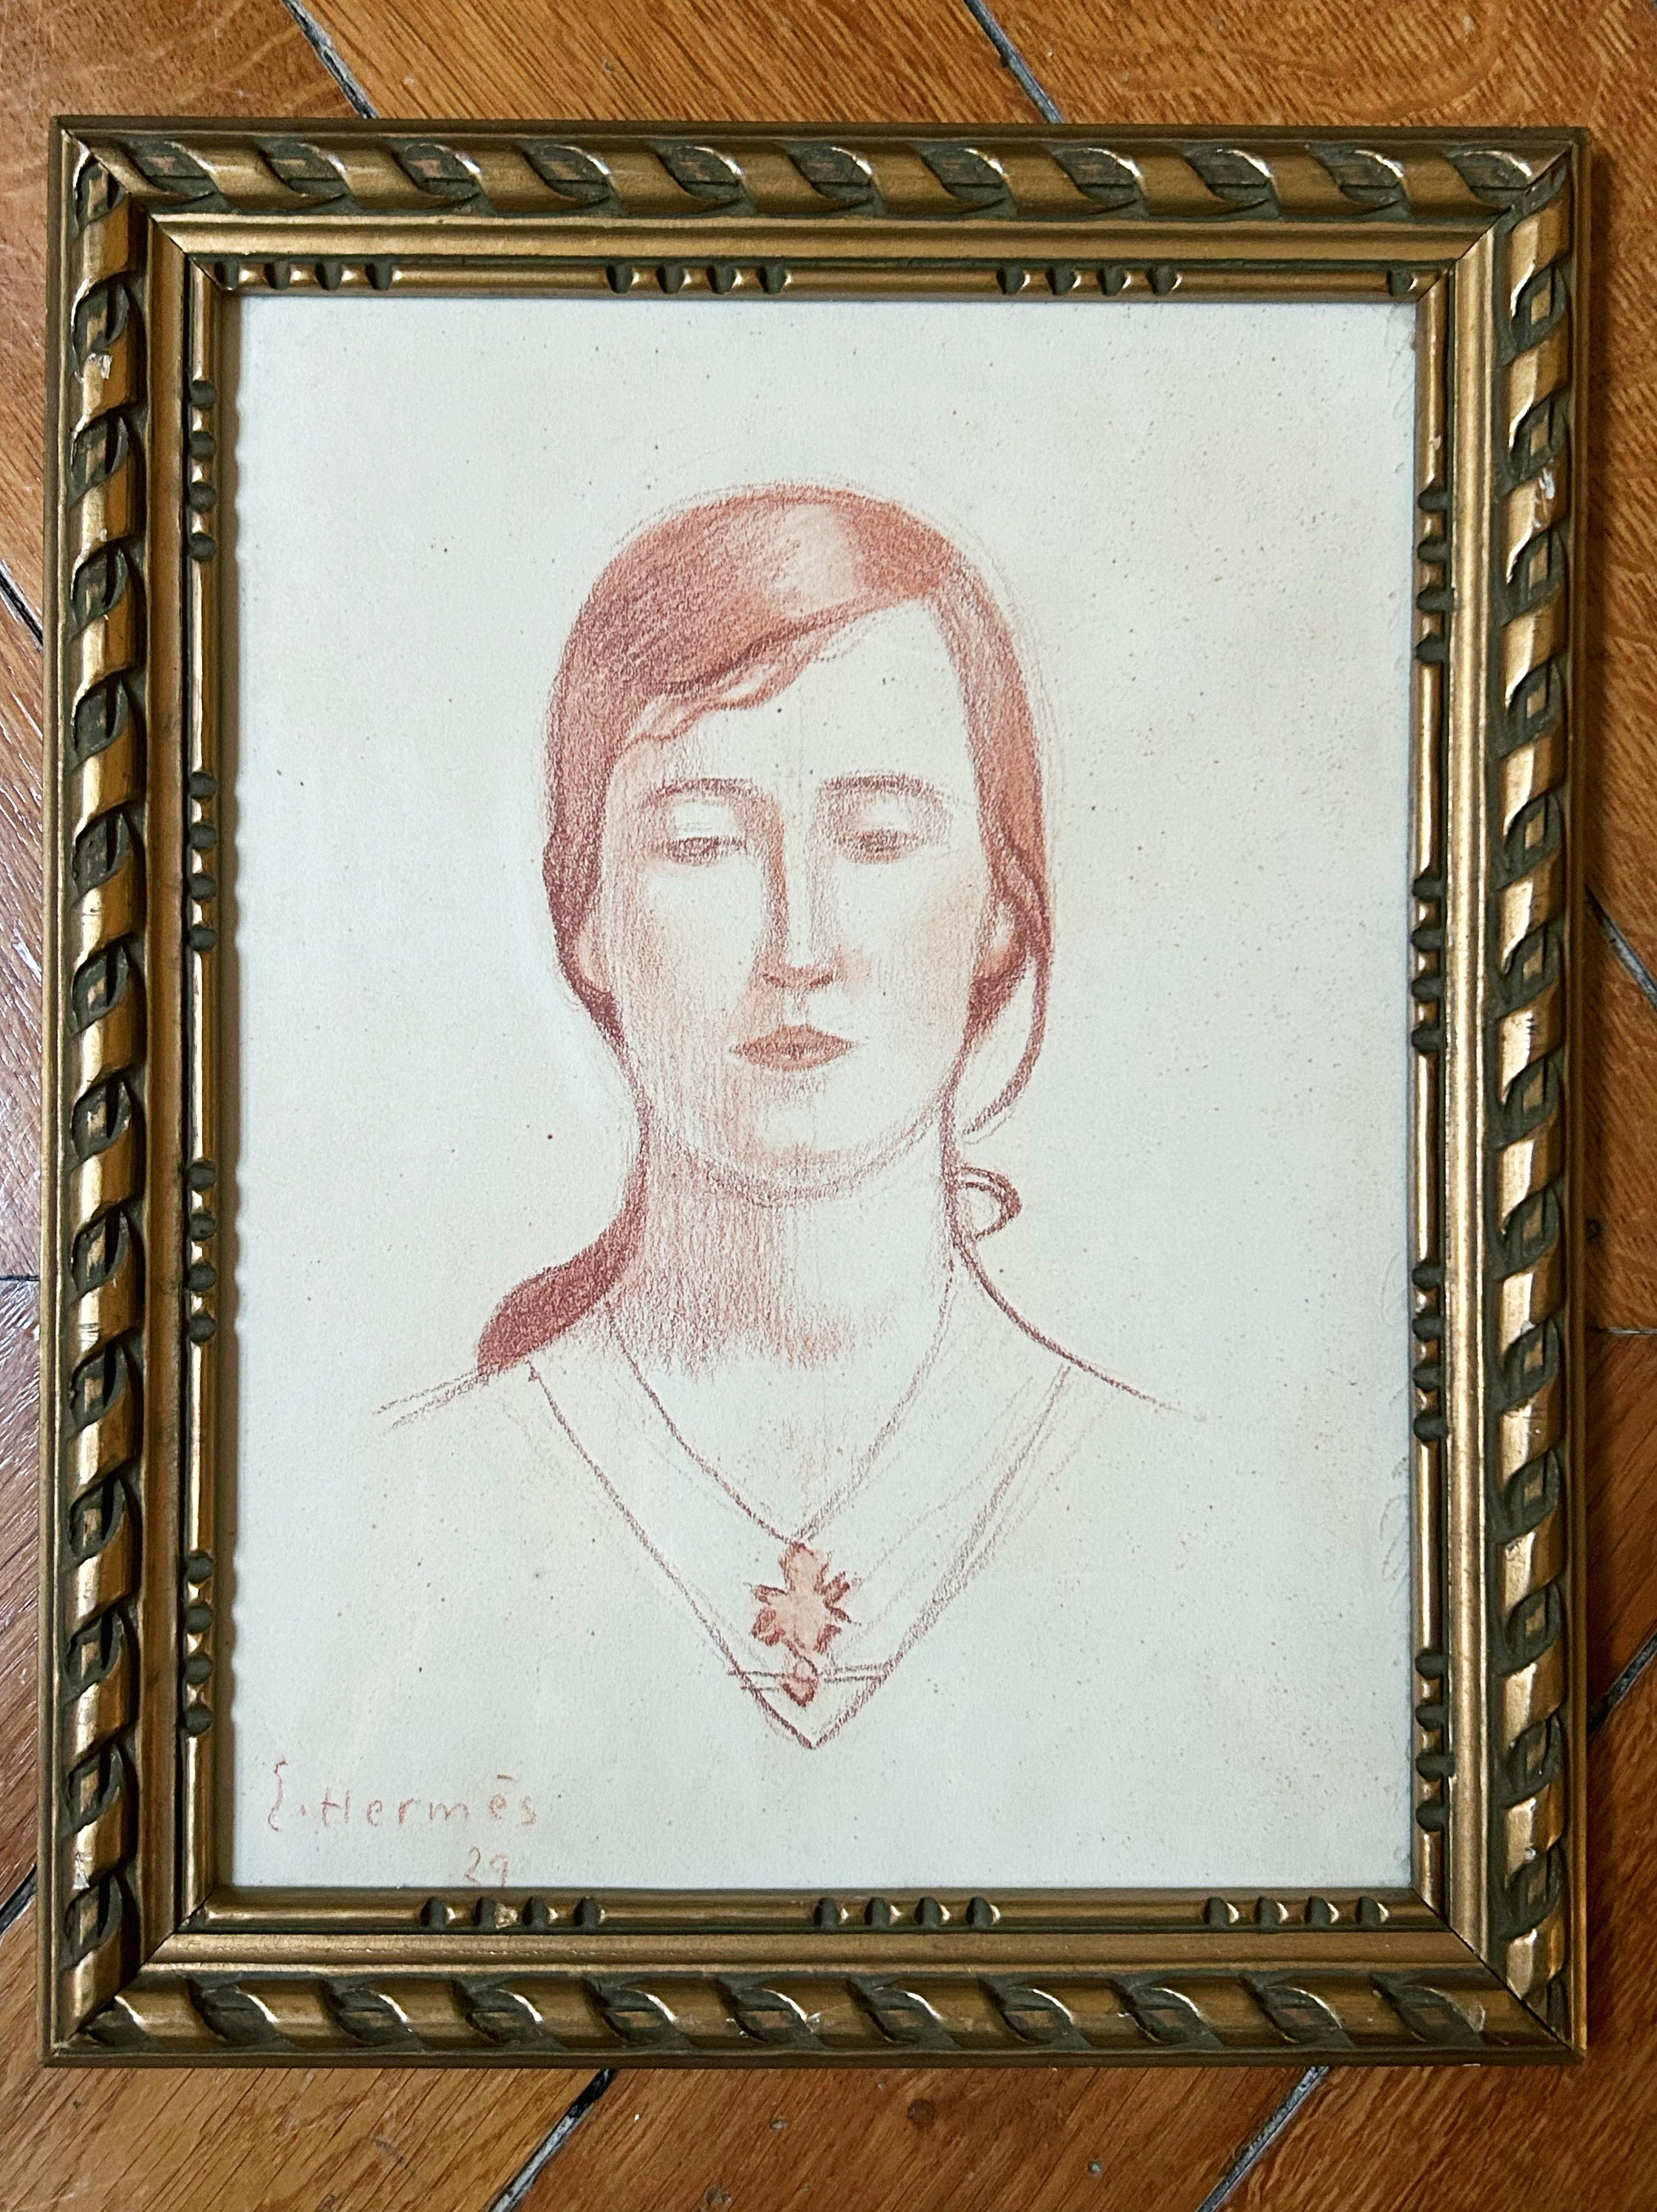 Portrait of a woman, 1929, red chalk on paper - Art by Erich Hermes